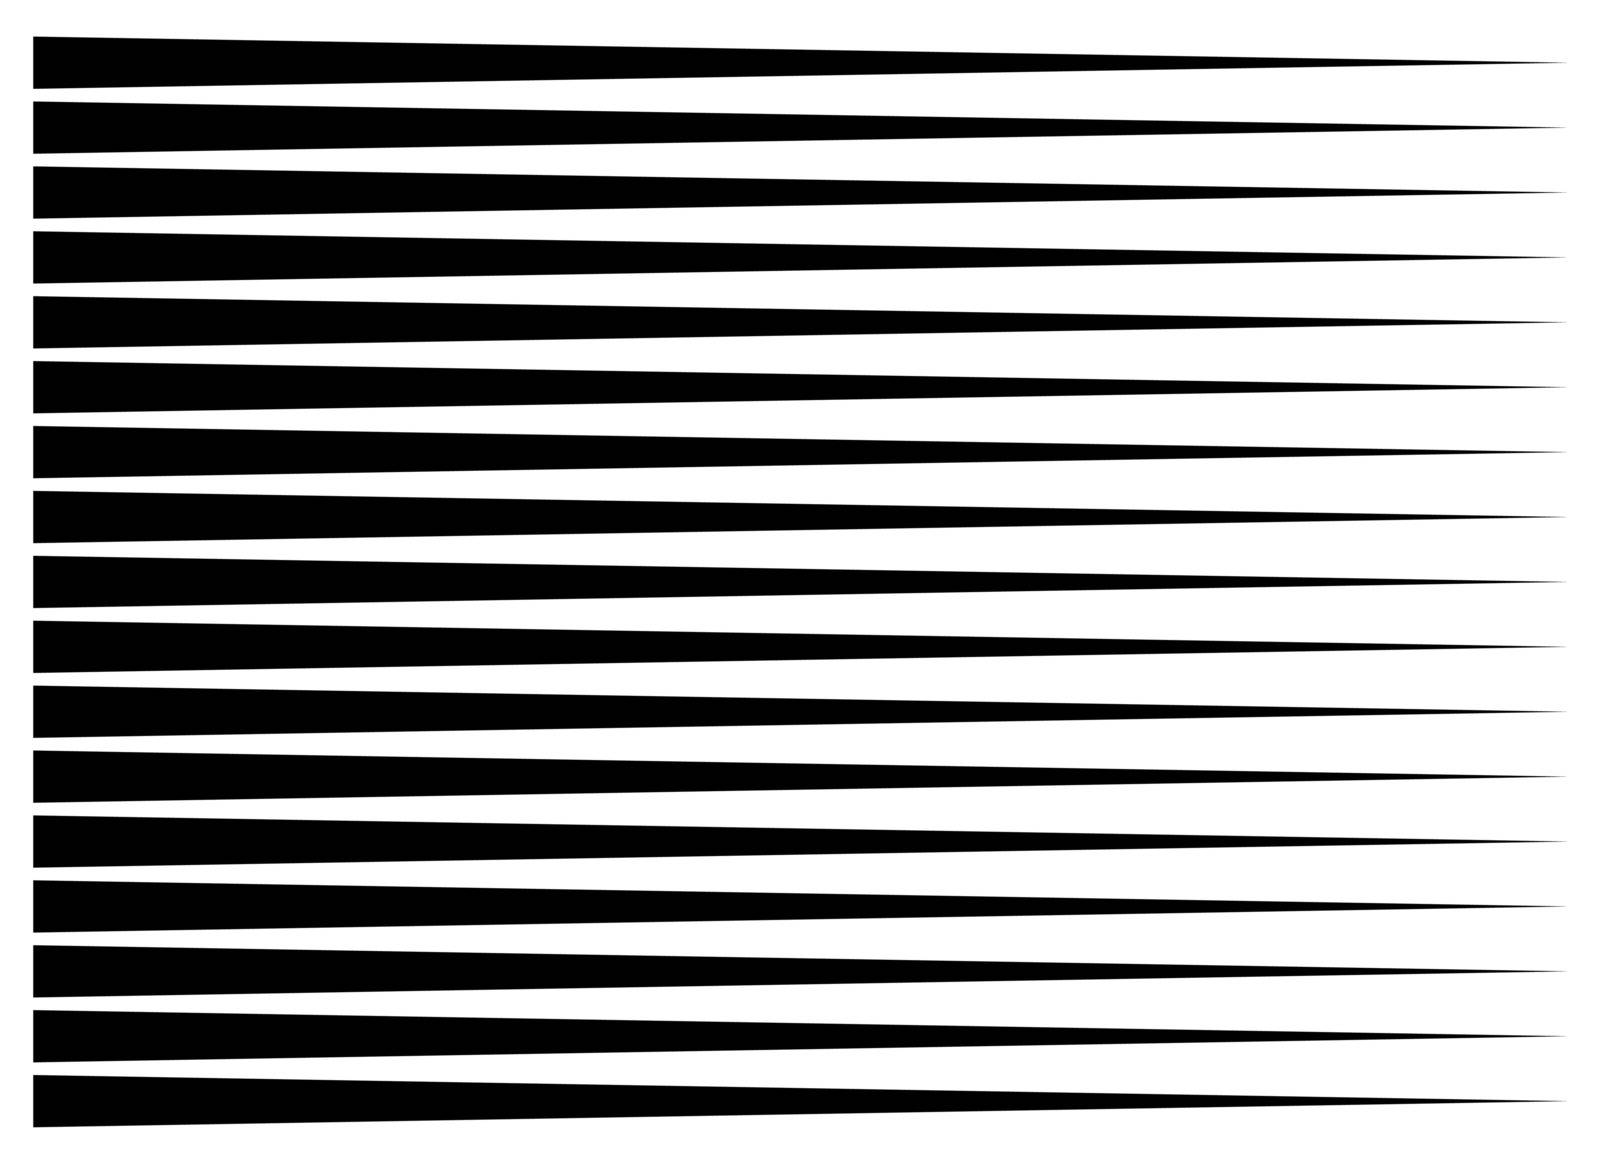 horizontal motion speed lines for comic book
